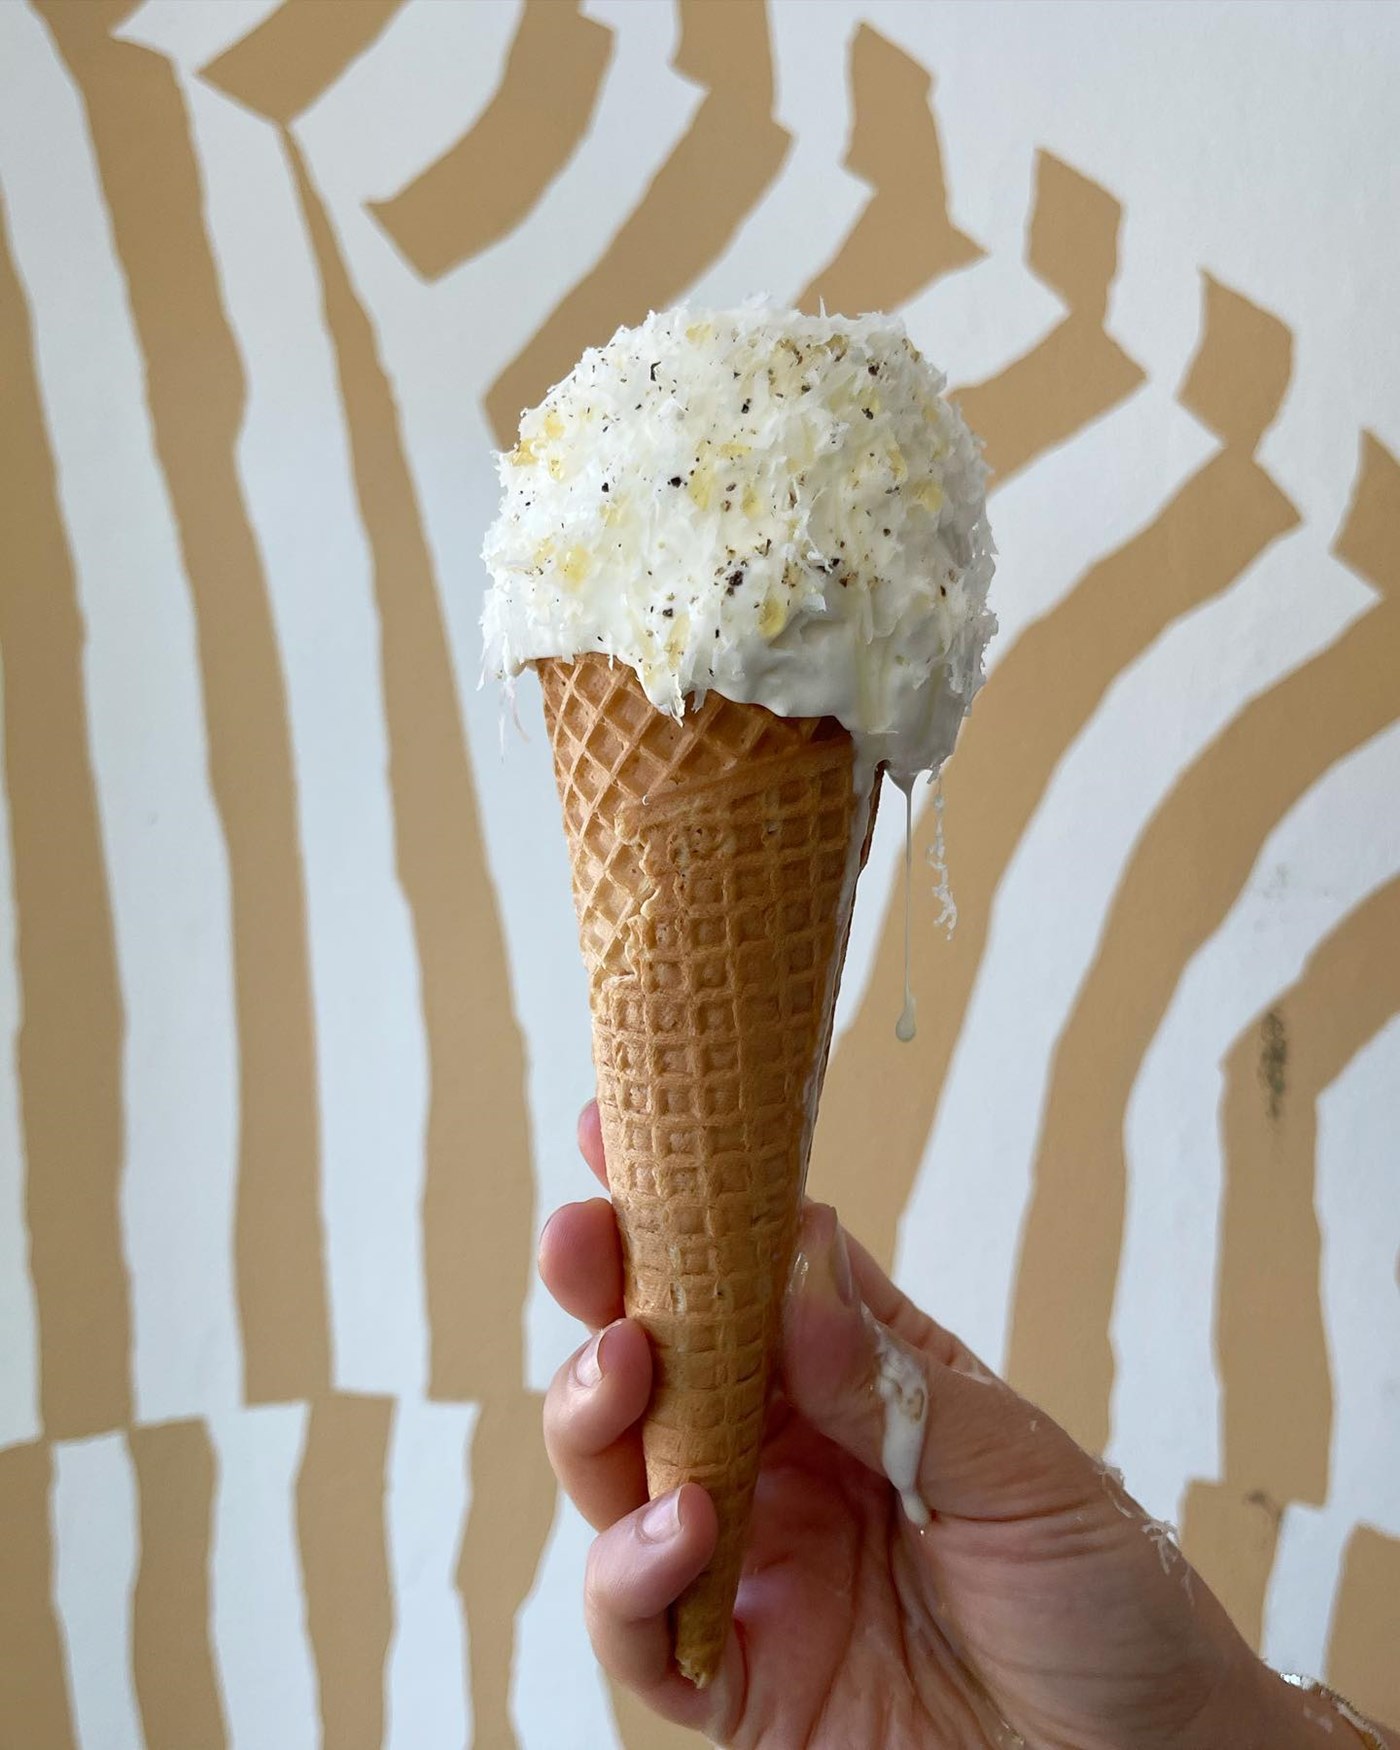 A scoop of dripping gelato is displayed against a striped wallpaper. 